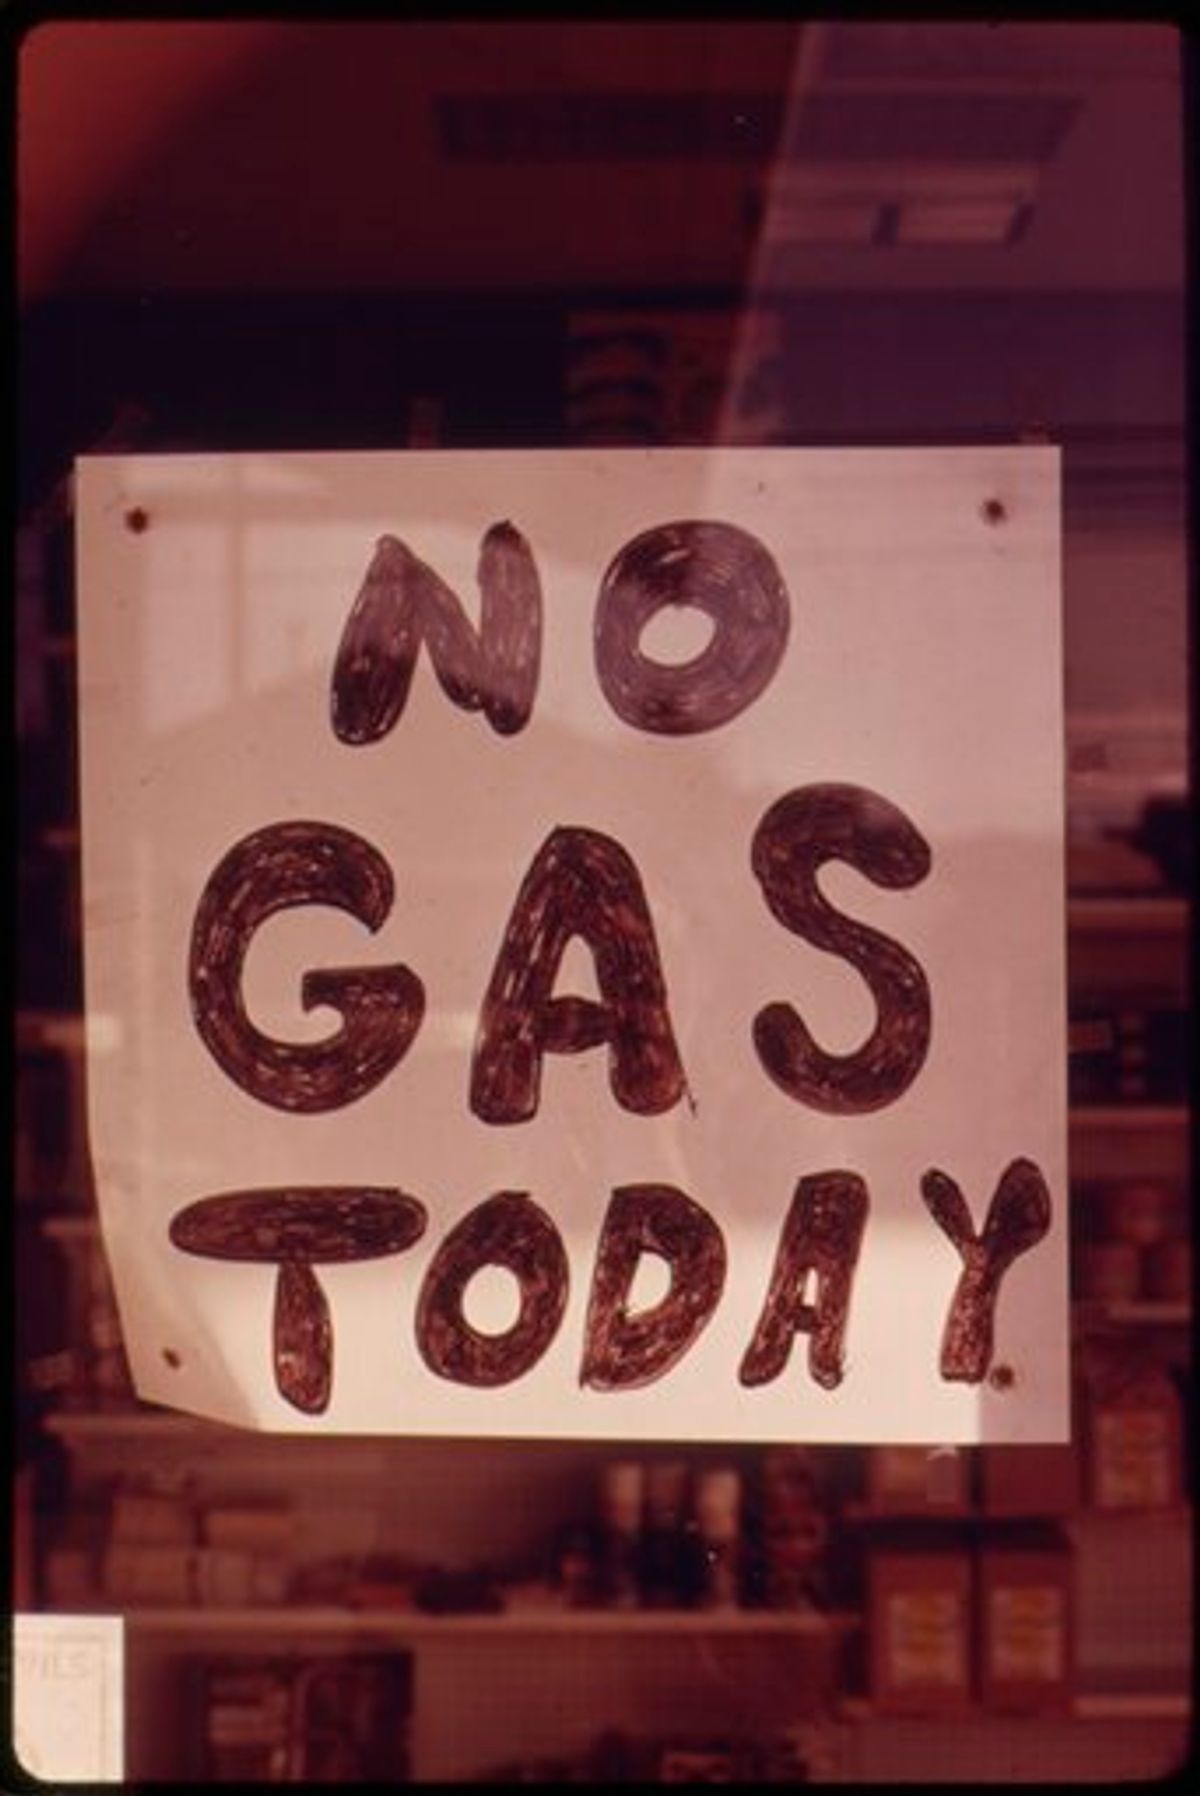 In this Oct. 1973 photo provided by the U.S. National Archives, a sign hangs in the window of a gas station in Lincoln City, Ore. The photo is part of Documerica, an EPA project during the 1970s in which the agency hired dozens of freelance photographers to capture thousands of images related to the environment and everyday life in America. Modeled after Documerica, the agency has embarked on a massive effort to collect photographs from across the United States and around the world over the next year that depict everything from nature's beauty to humanity's impact, both good and bad. (AP Photo/U.S. National Archives, David Falconer) (AP)